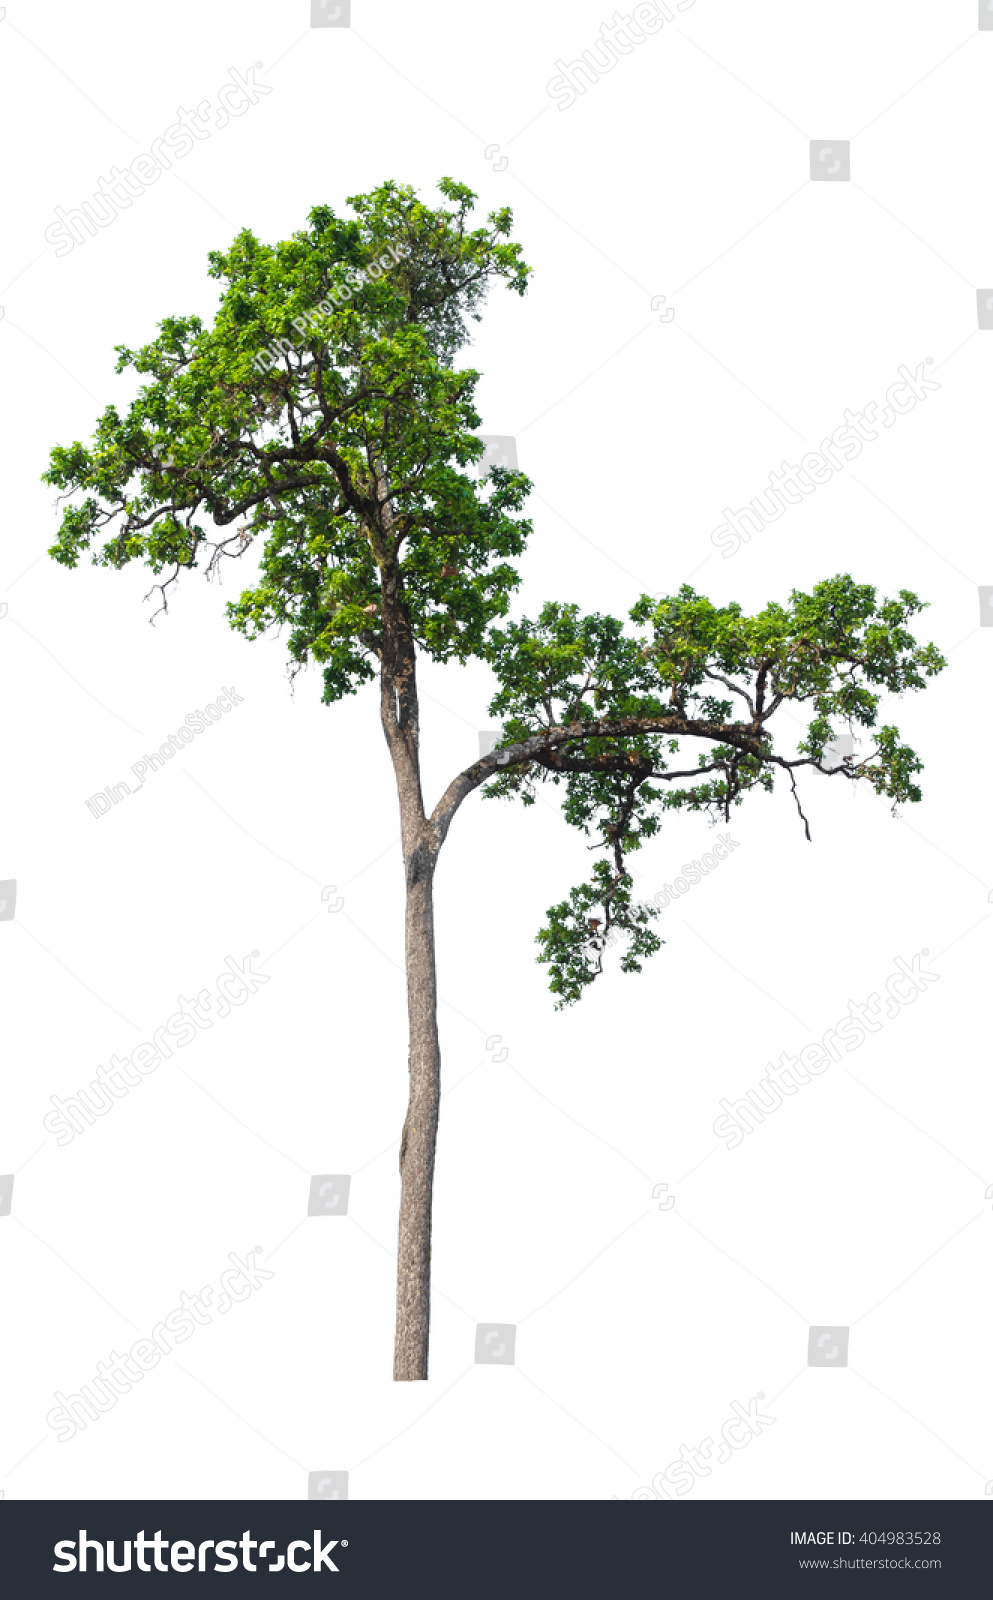 Tree Isolated On White Stock Photo 404983528 - Shutterstock